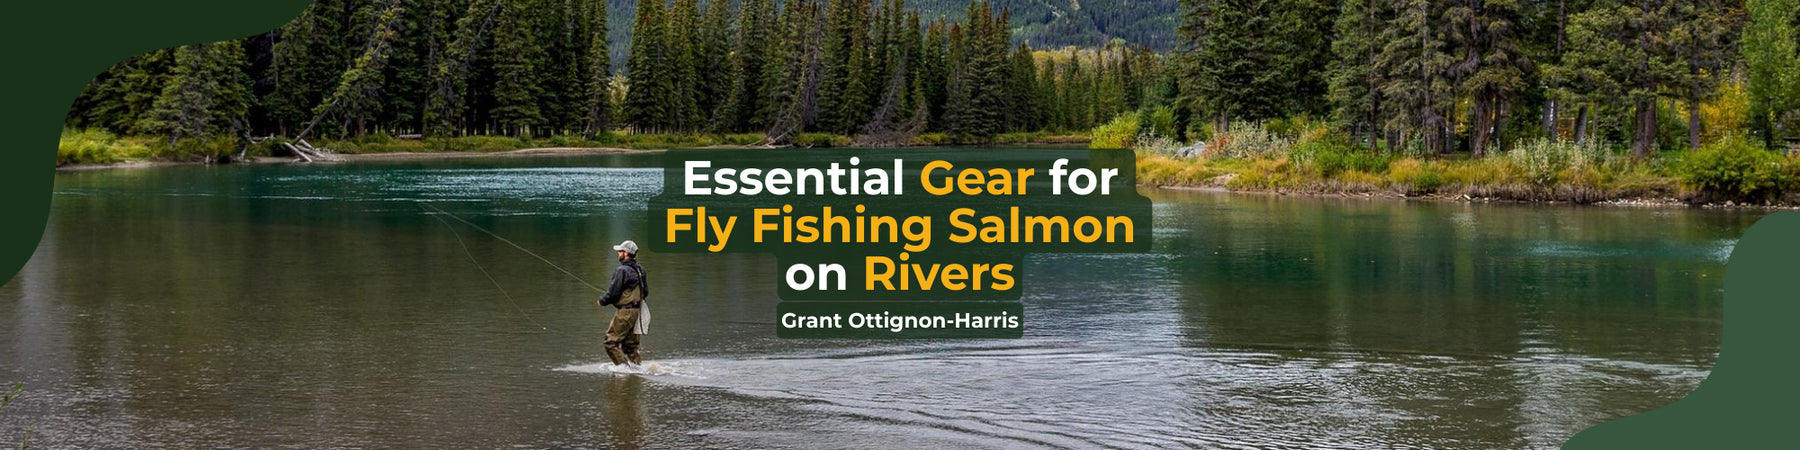 What gear do you need for fly fishing salmon in rivers?